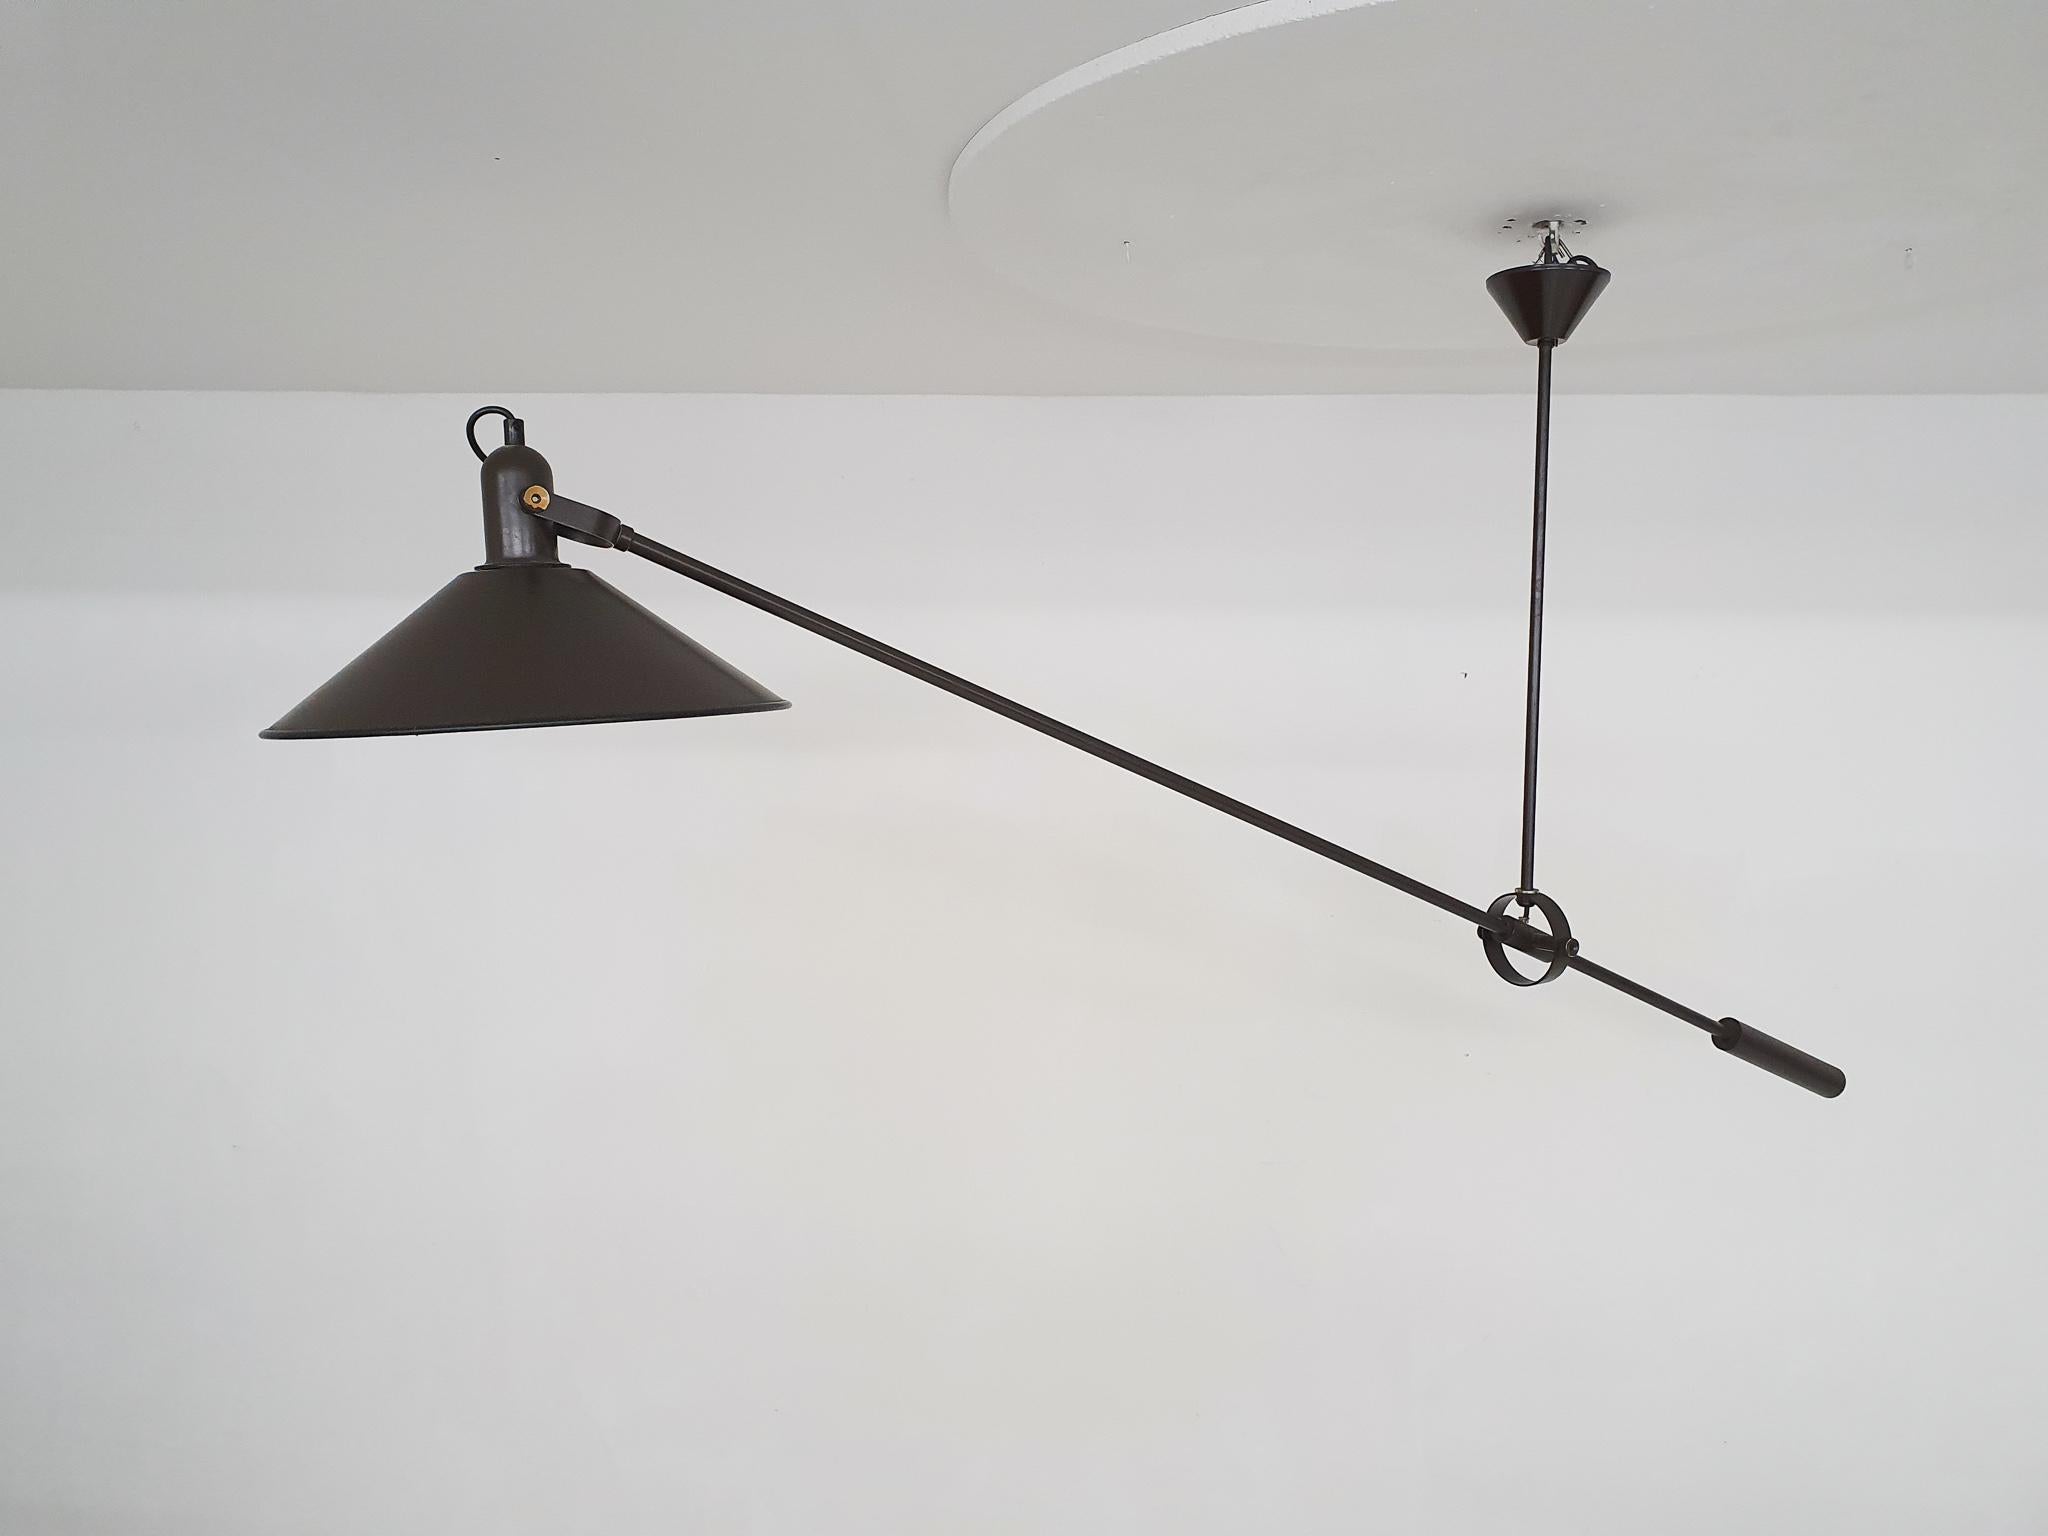 Brown metal counter balance adjustable ceiling light by J.J.M. Hoogervorst for Anvia Almelo, The Netherlands
In good original condition, only the bolts to adjust the lamp have lost the brown paint.

 